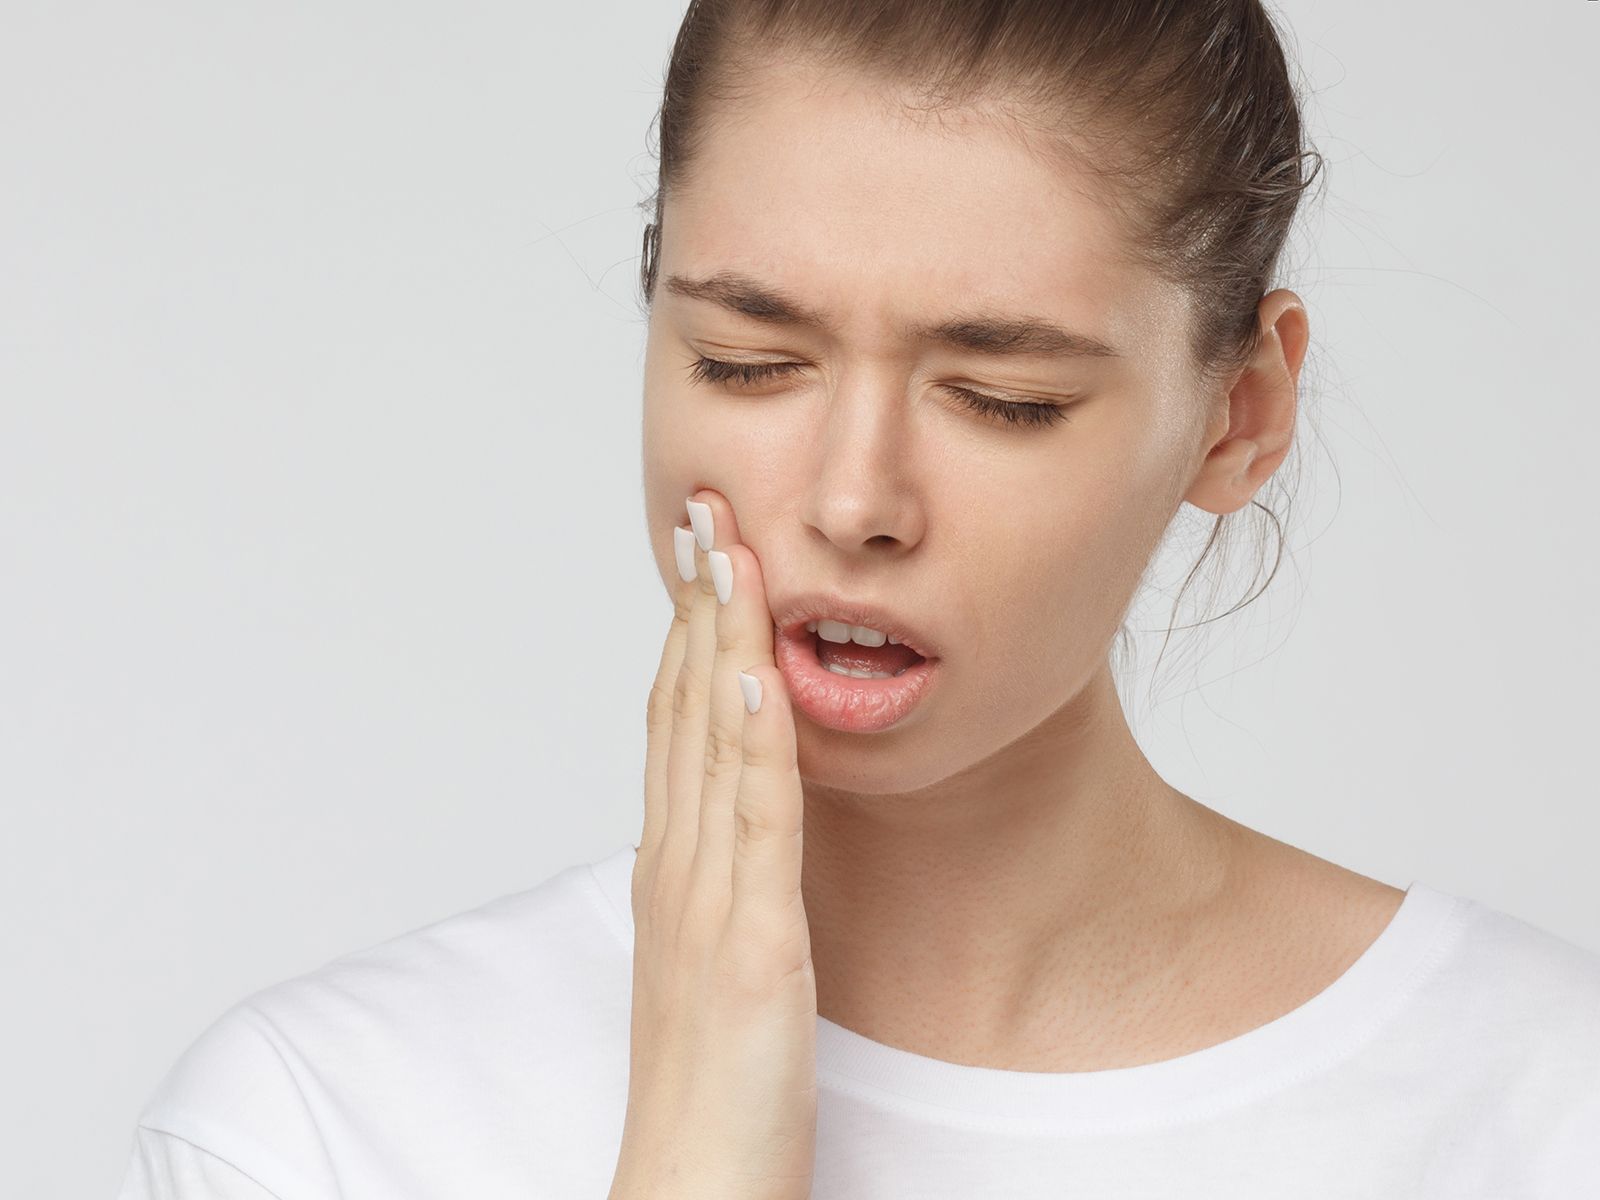 How do I know if my tooth infection is serious?